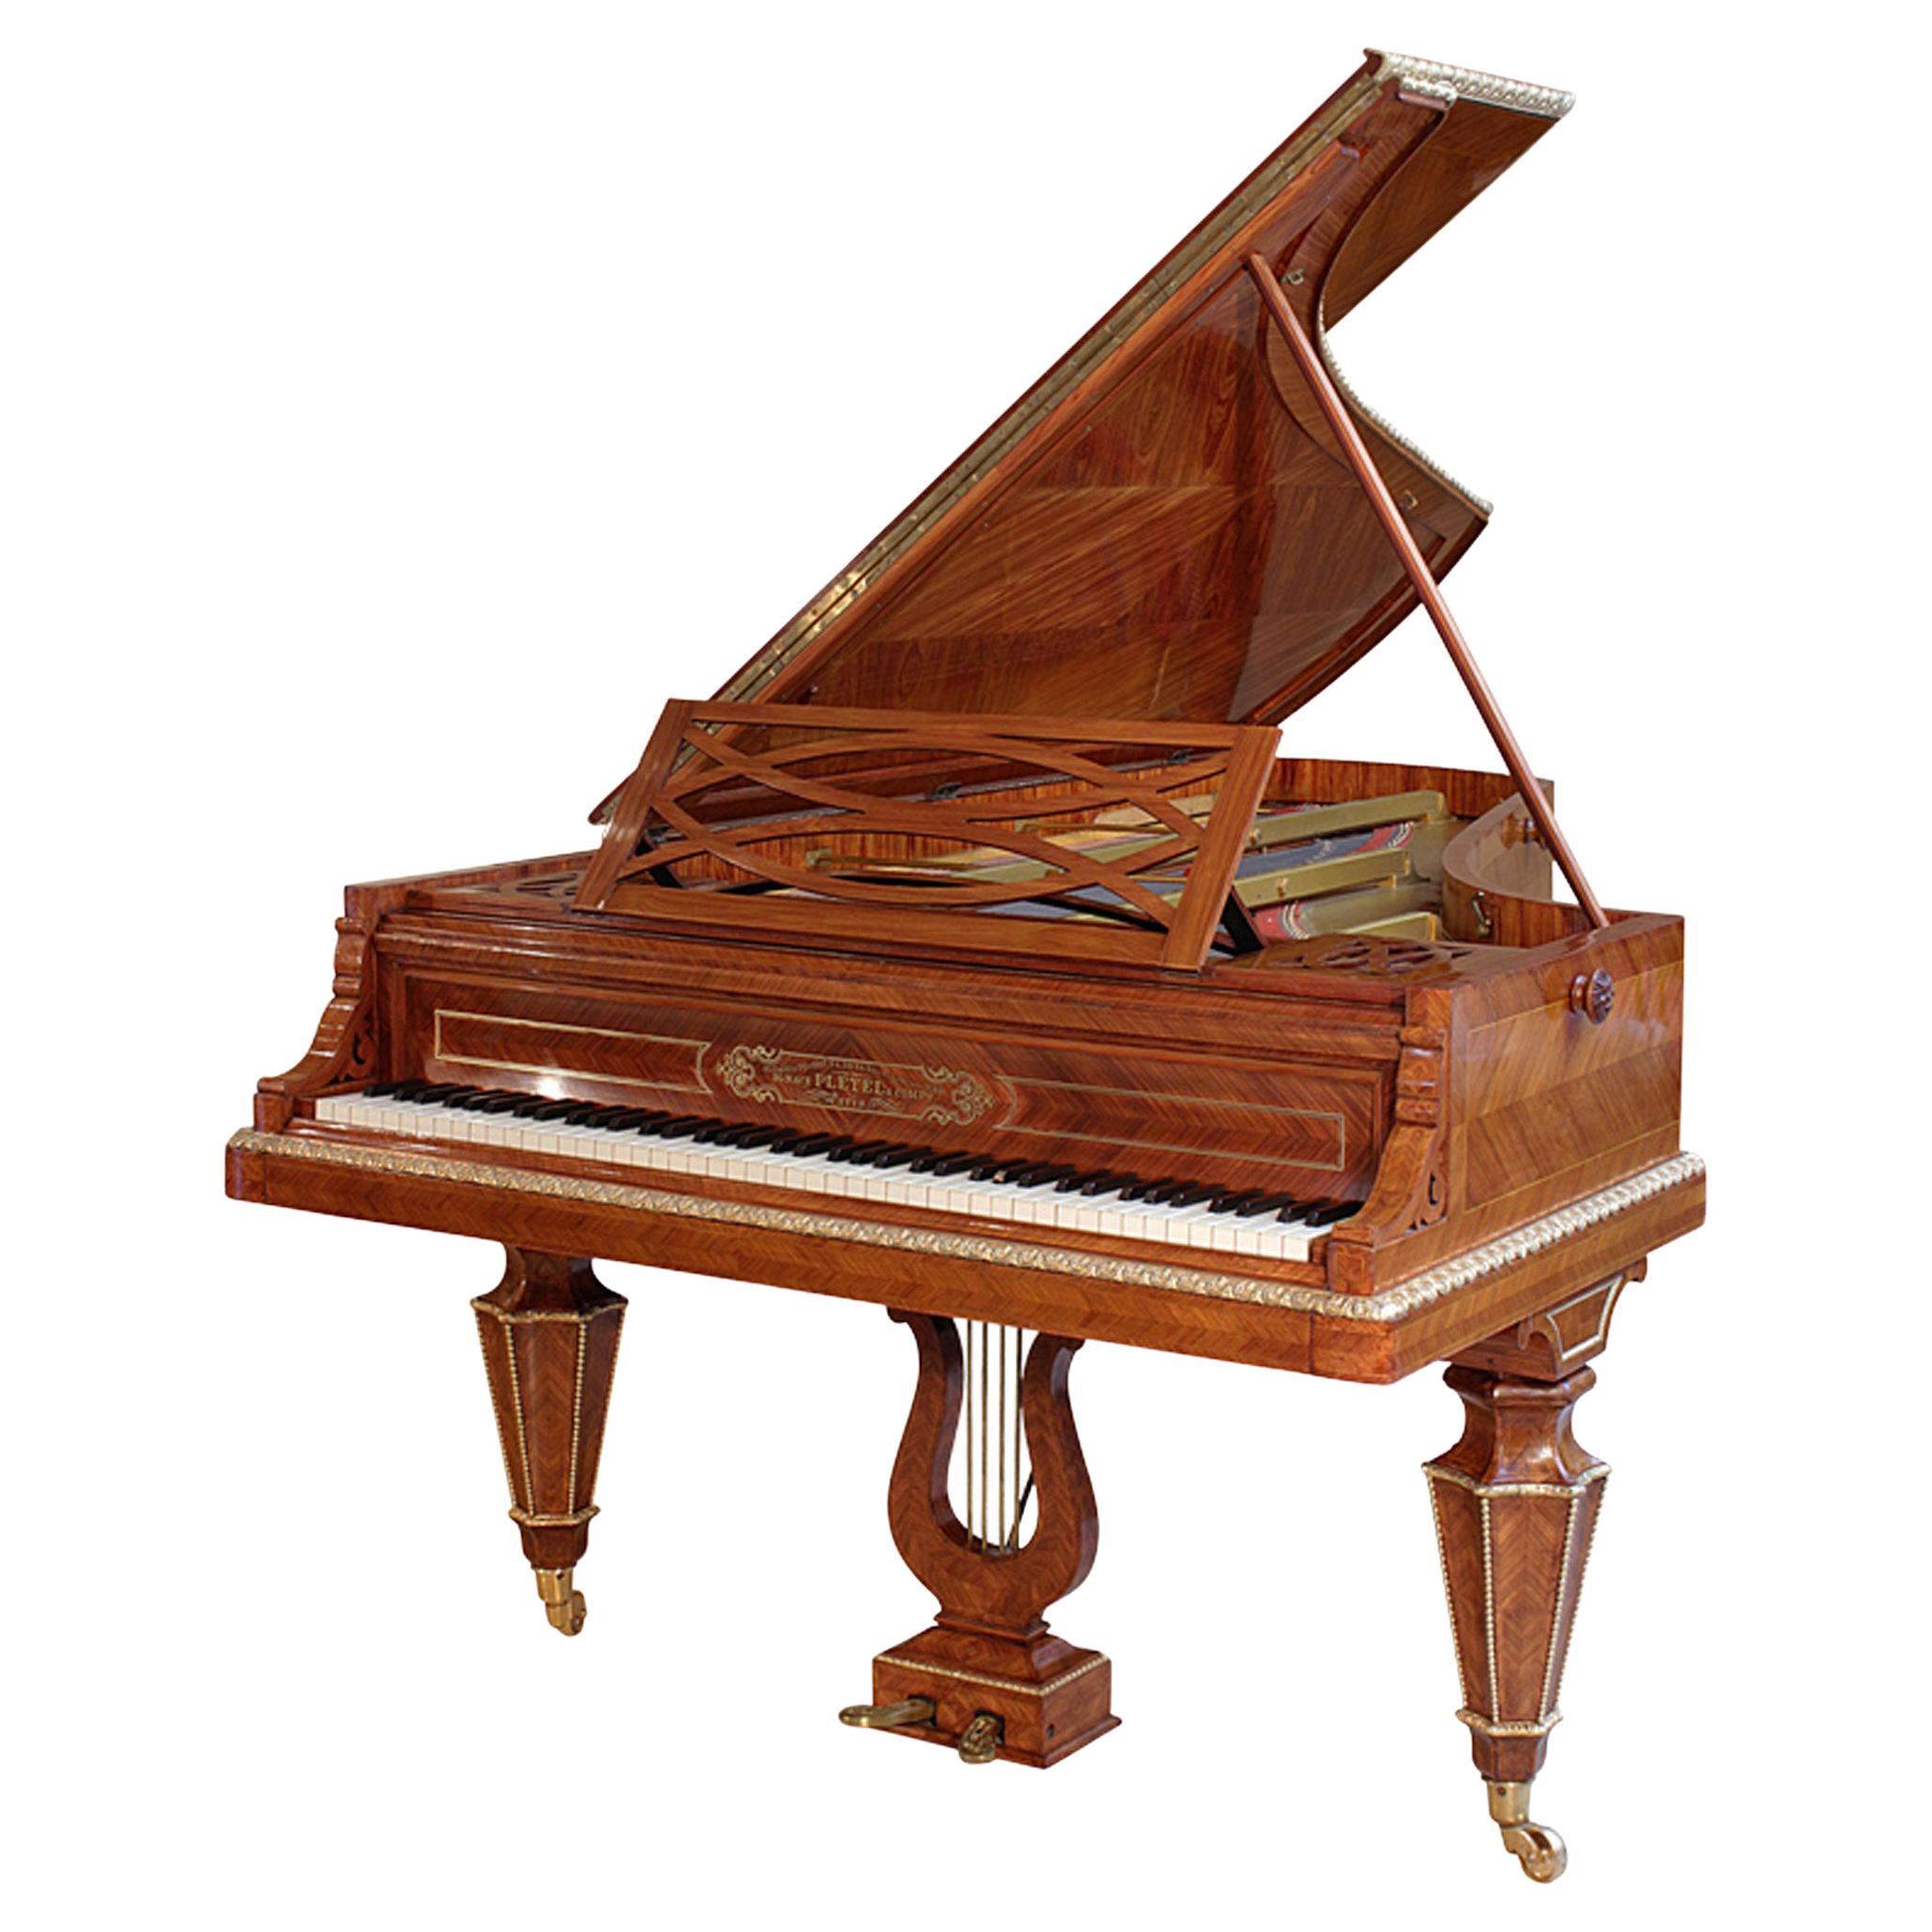 French Mid-19th Century Concert Grand Piano Signed Pleyel